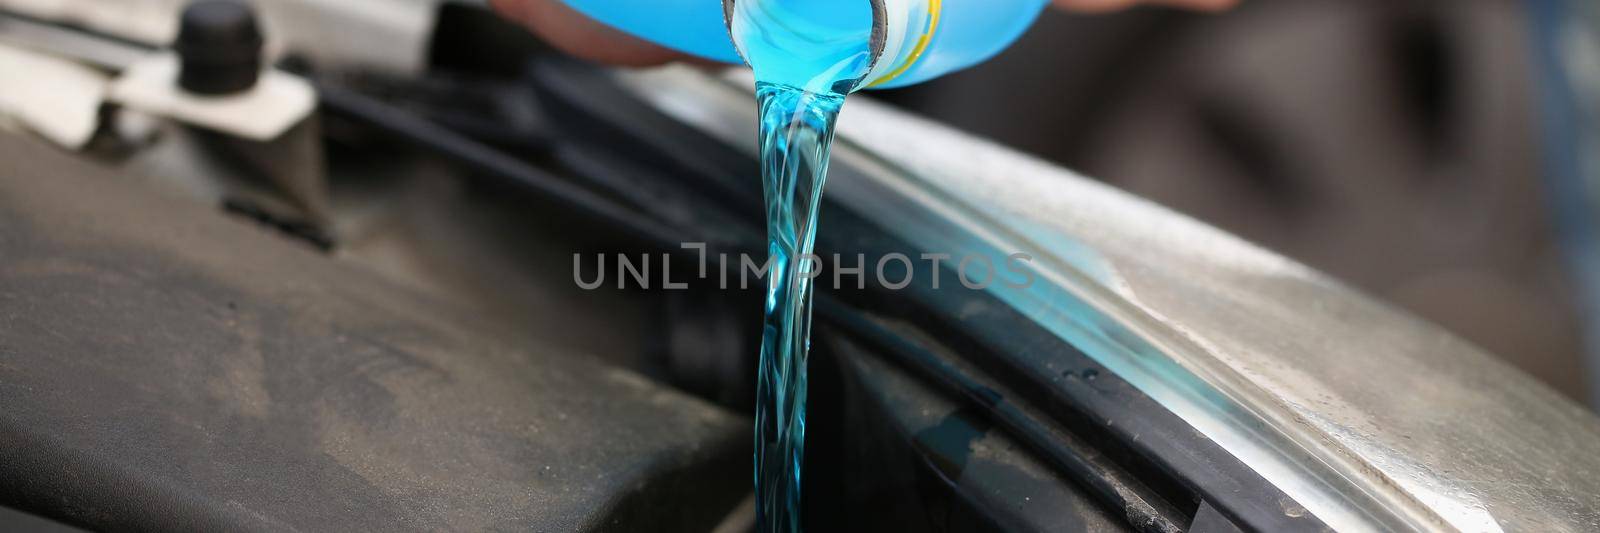 A man pours antifreeze from a canister into a car engine, close-up. Blue coolant, anti-corrosion properties, service station